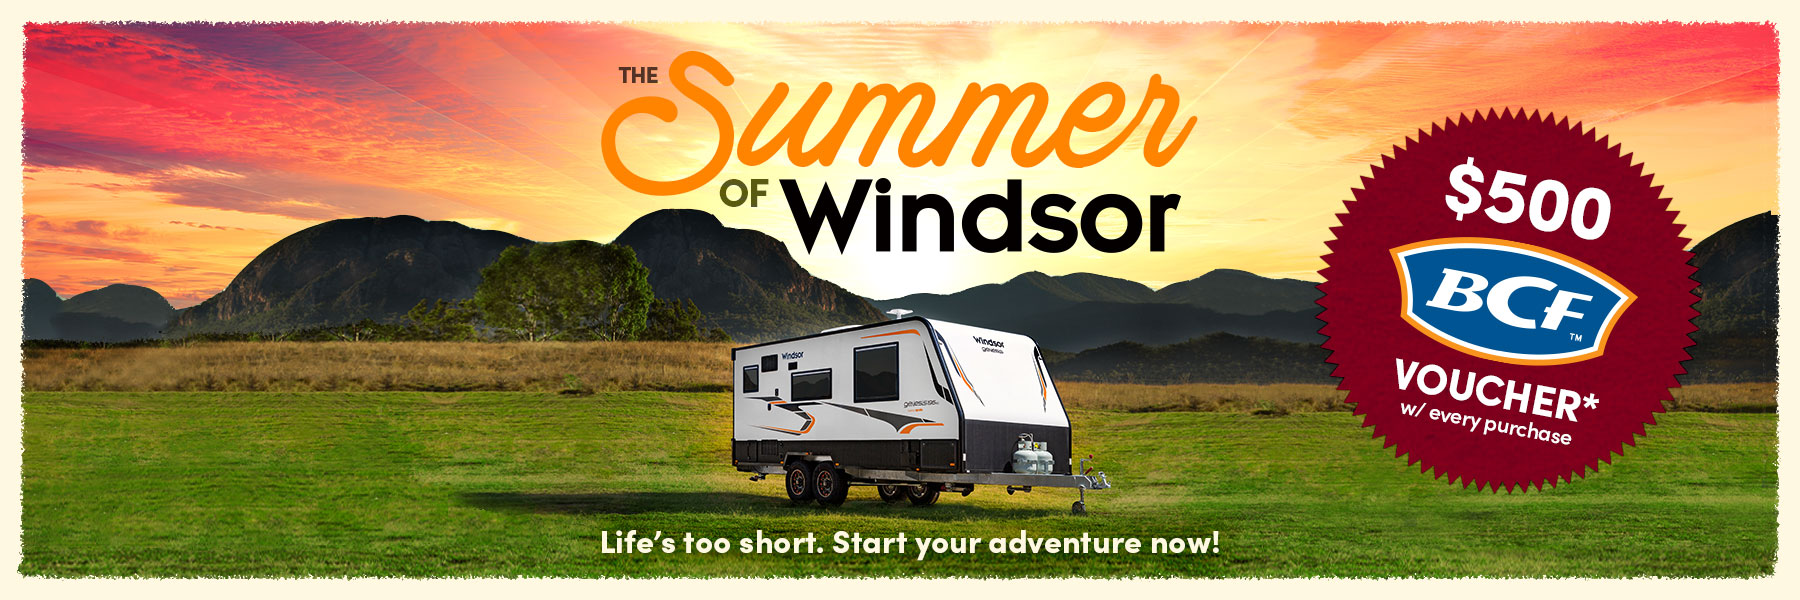 The Summer of Windsor Caravan Campaign $500 BCF Voucher with every purchase of Windsor in September. Terms and conditions apply.